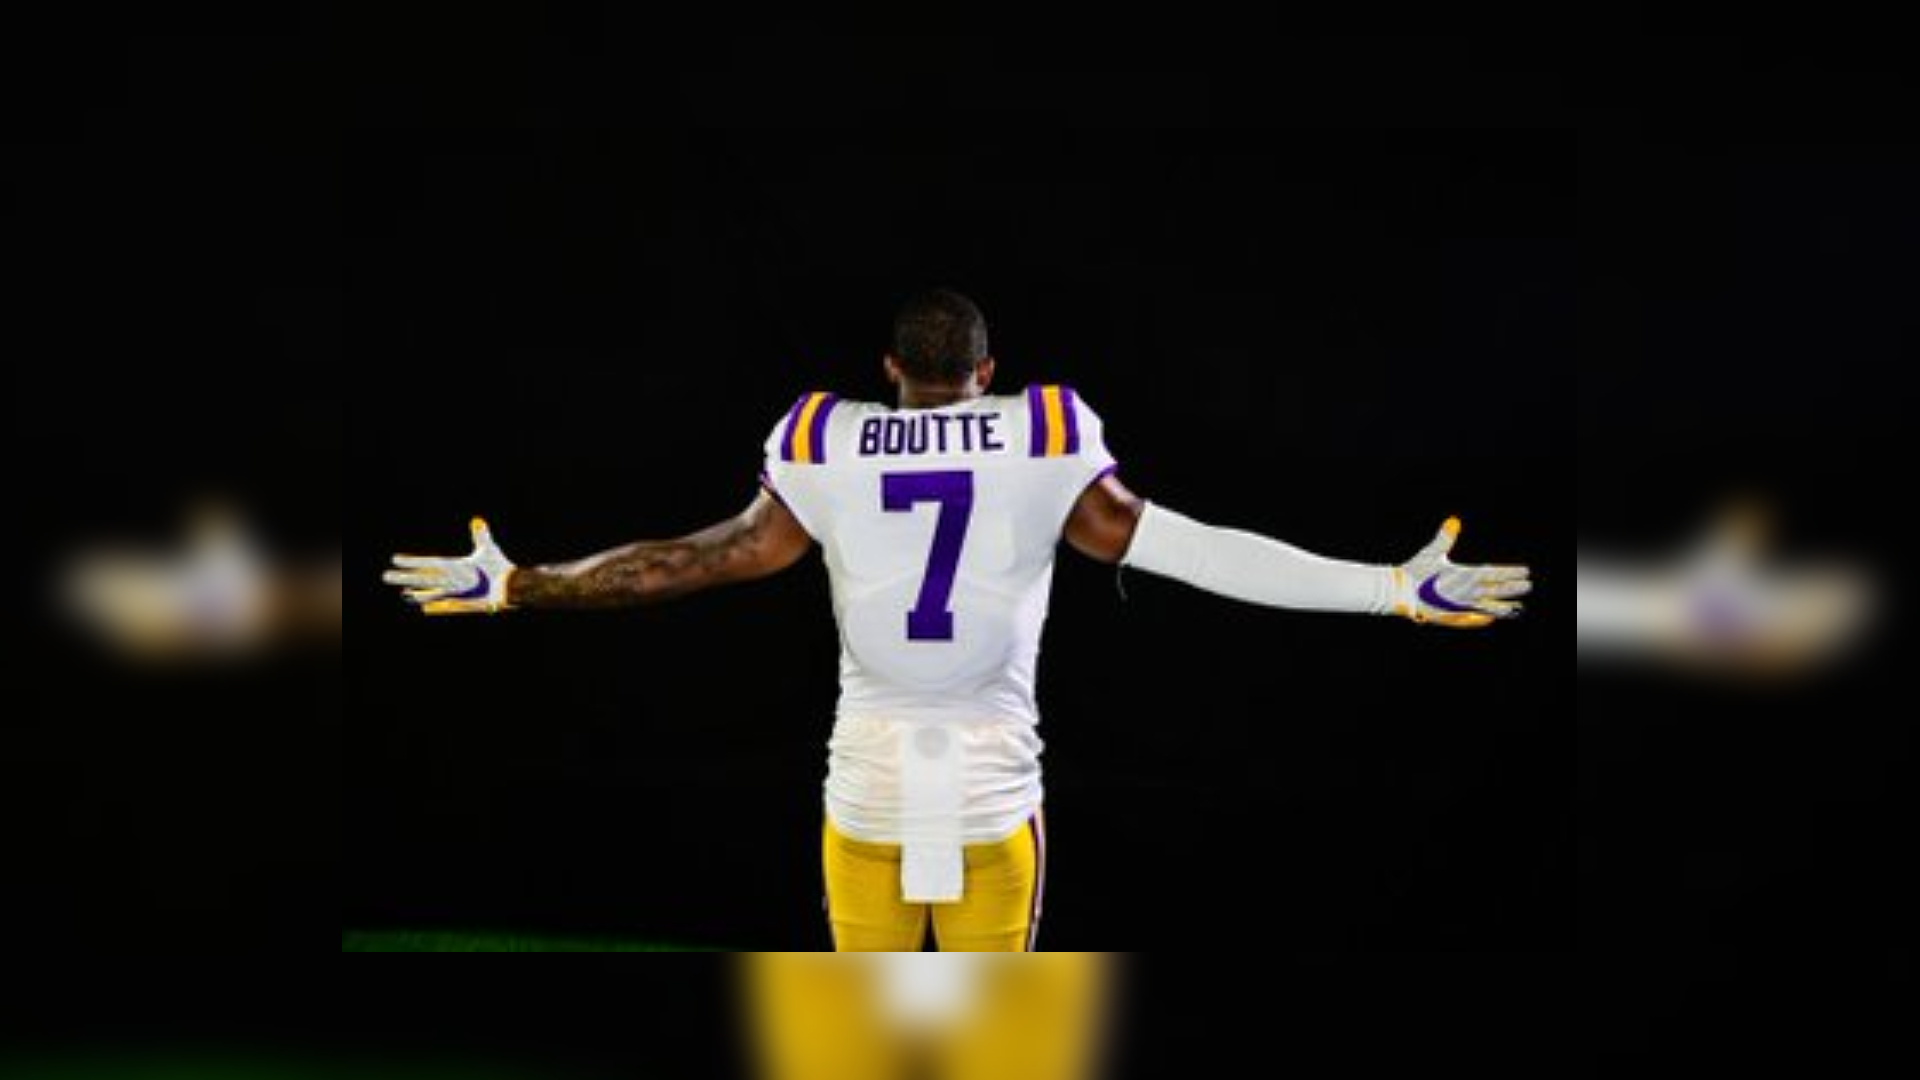 BRPROUD. LSU's Kayshon Boutte takes on jersey No. 7 for upcoming season